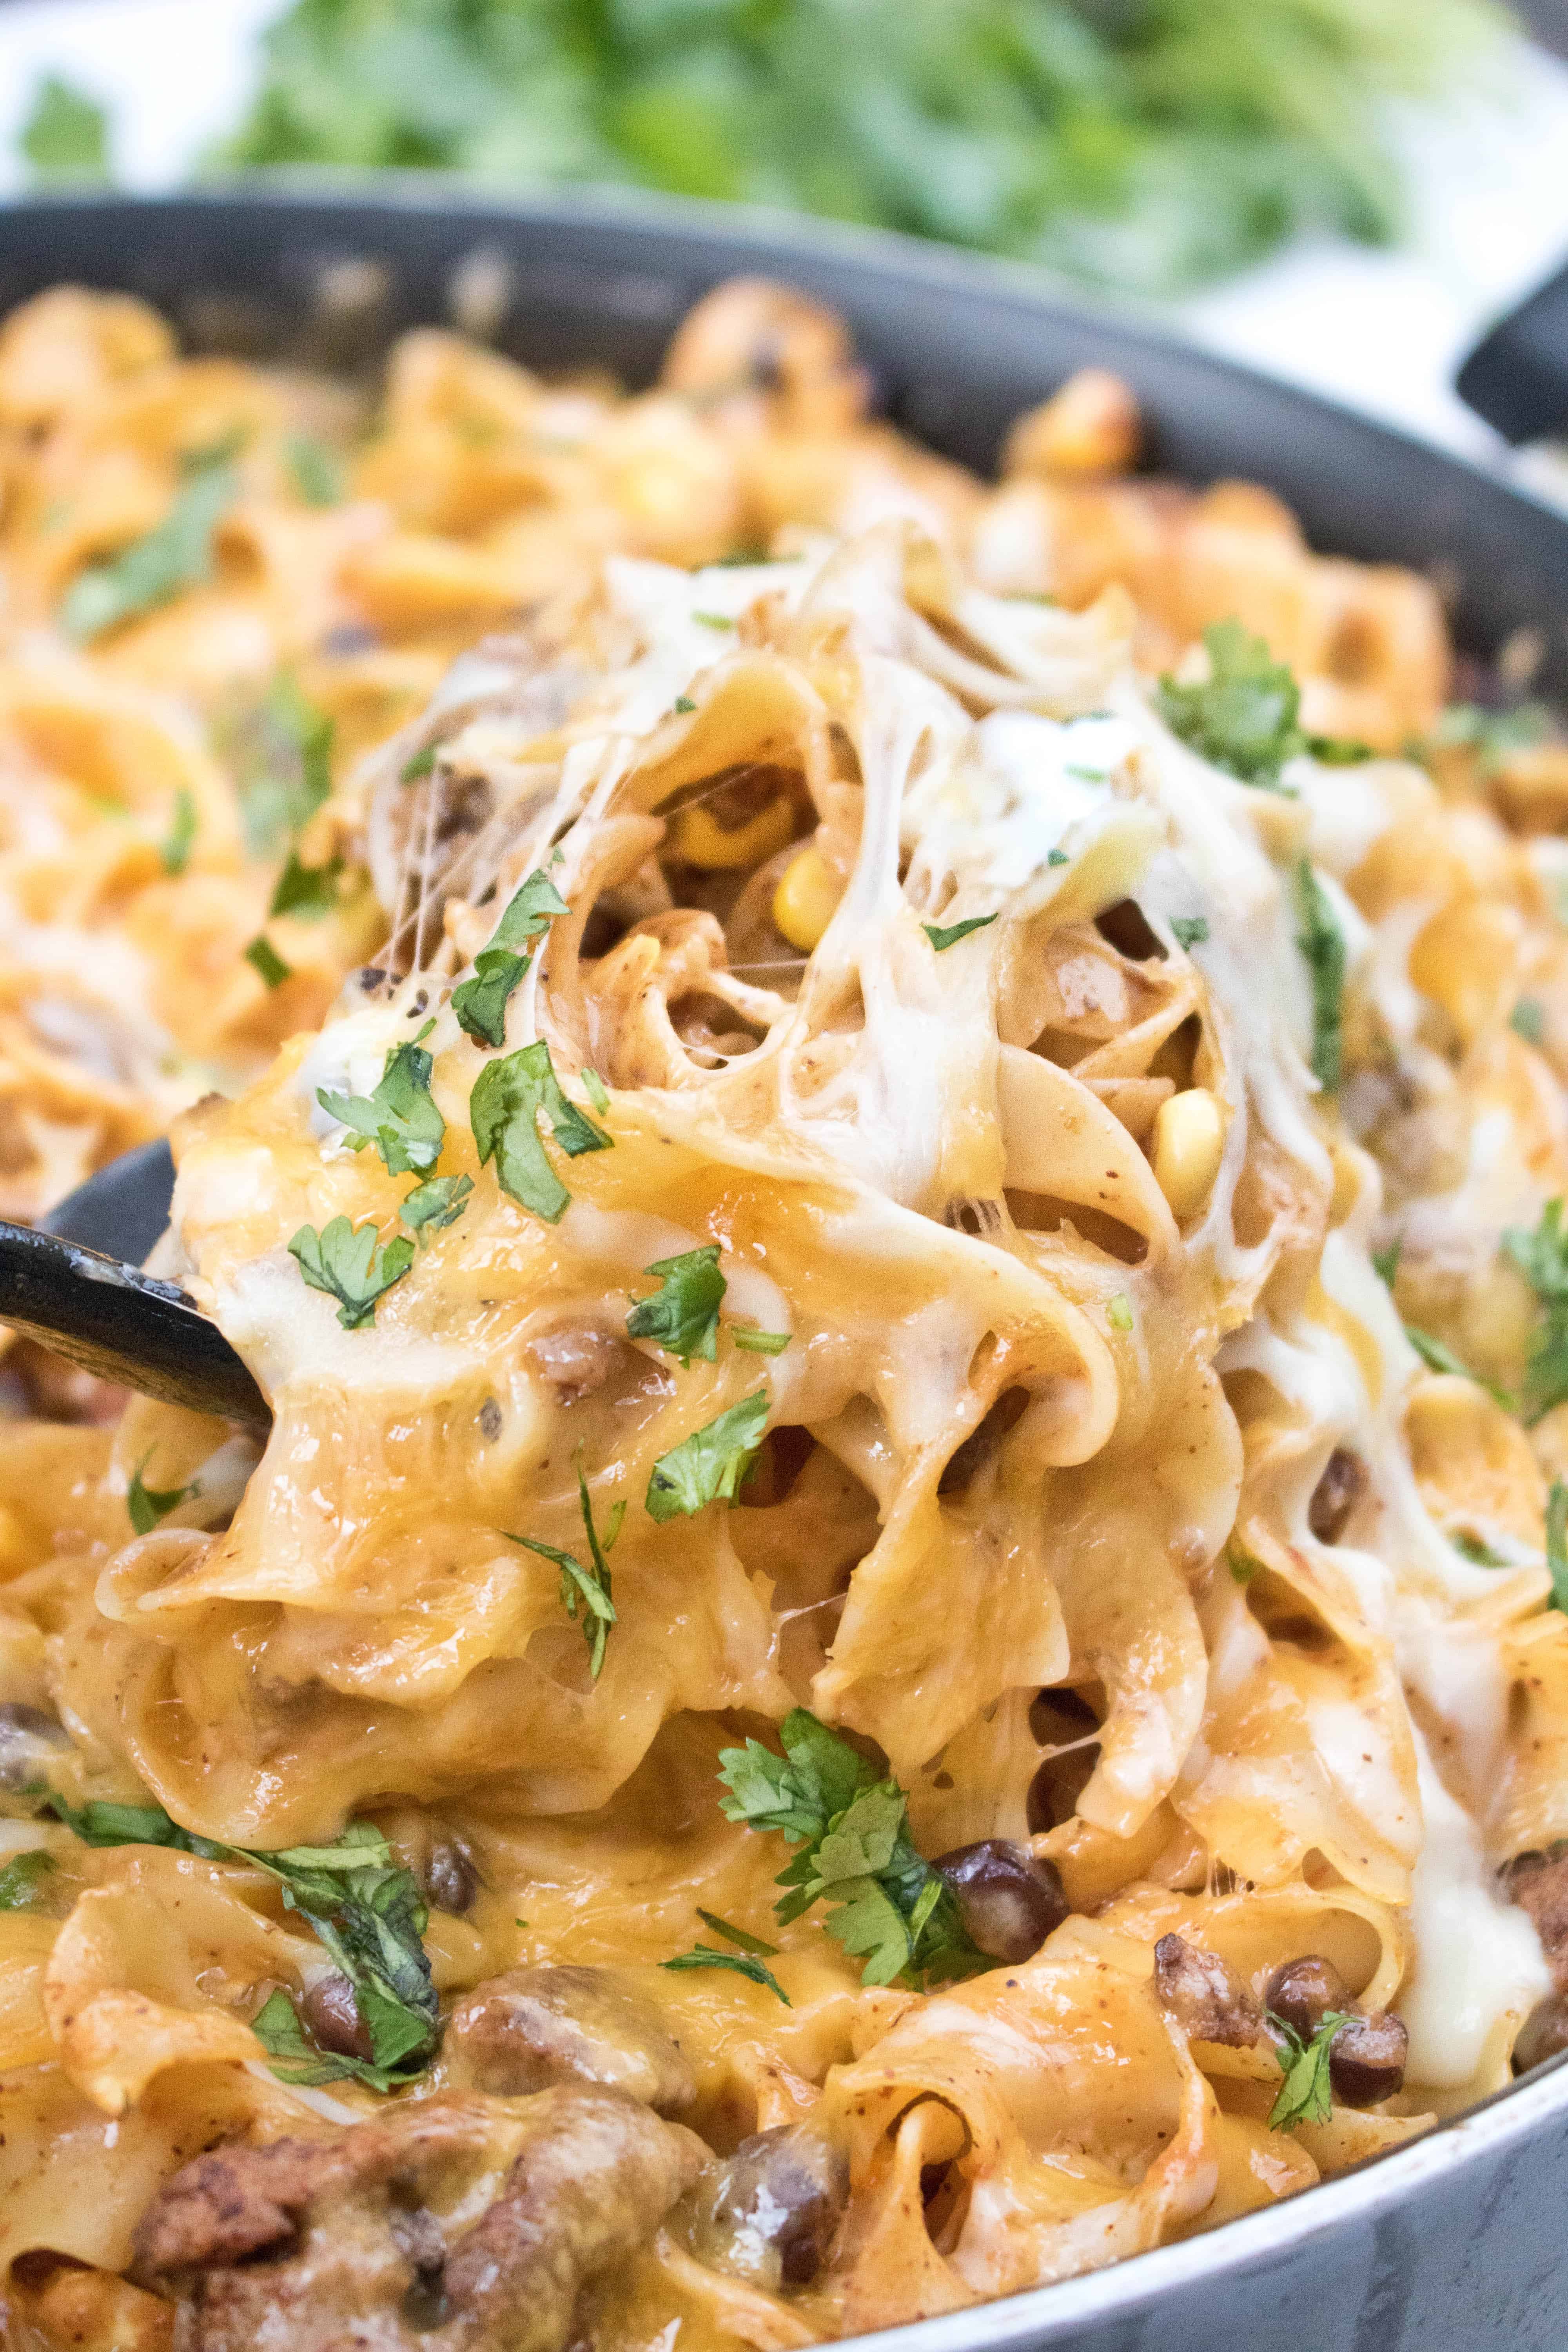 This Enchilada Skillet Pasta is loaded with flavor and cheese making it a delicious, easy and comfort food at it's finest!